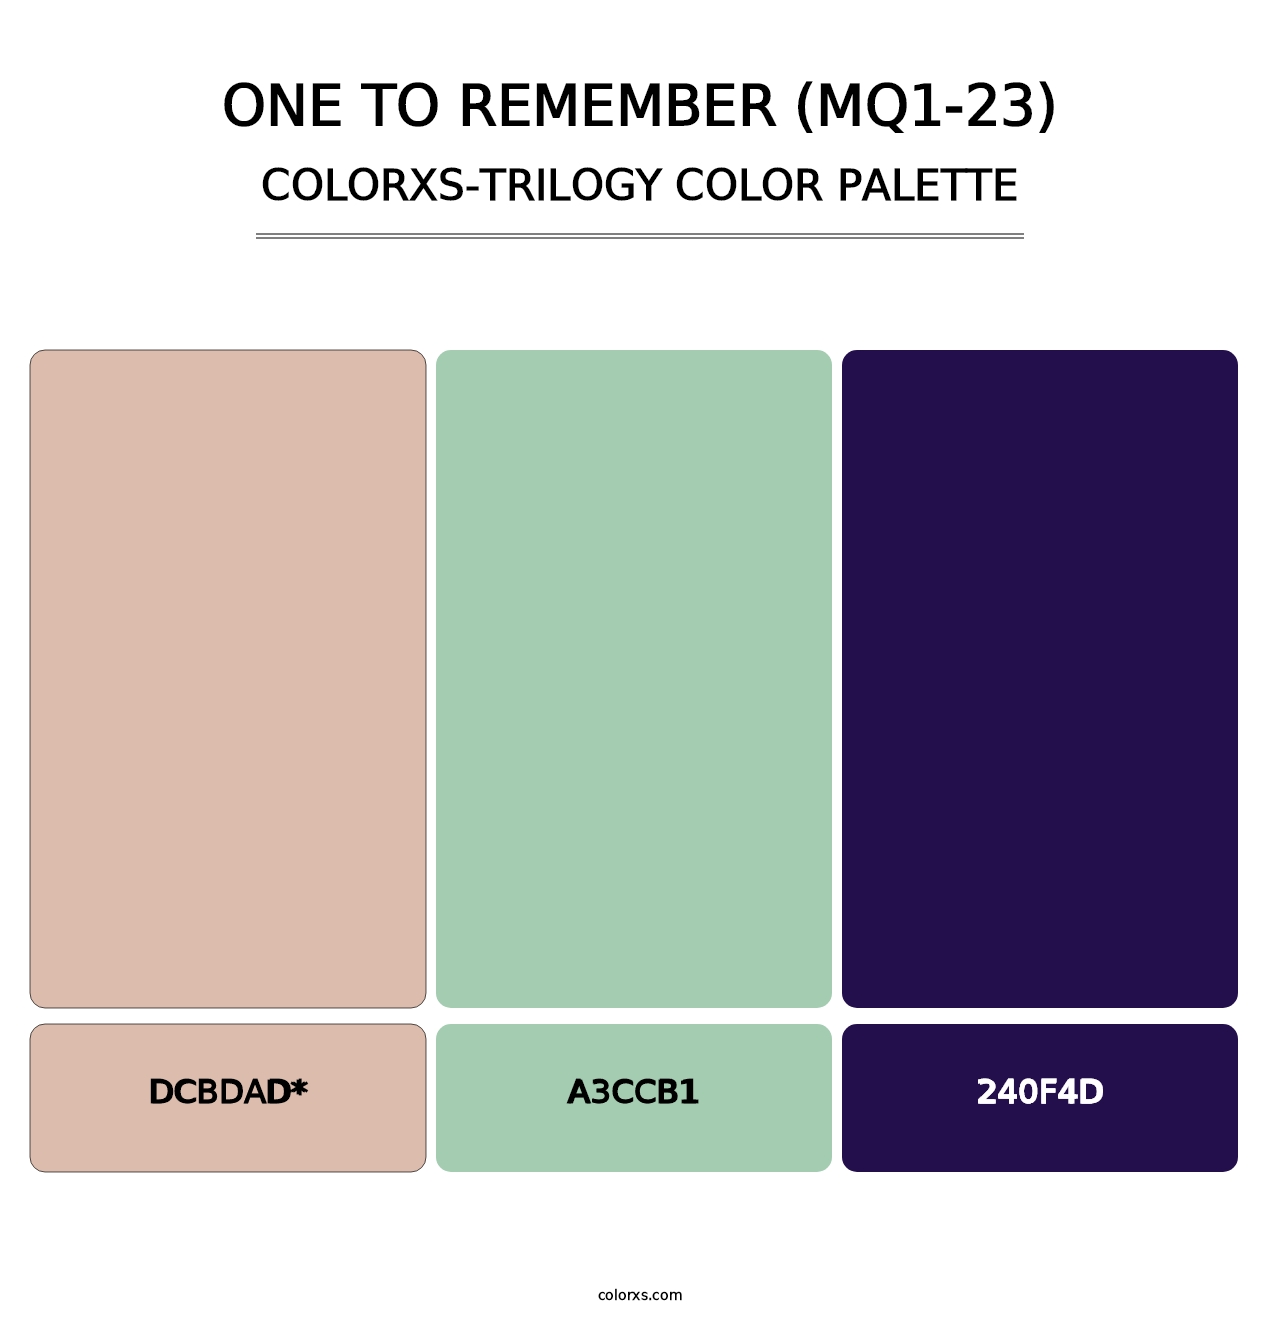 One To Remember (MQ1-23) - Colorxs Trilogy Palette